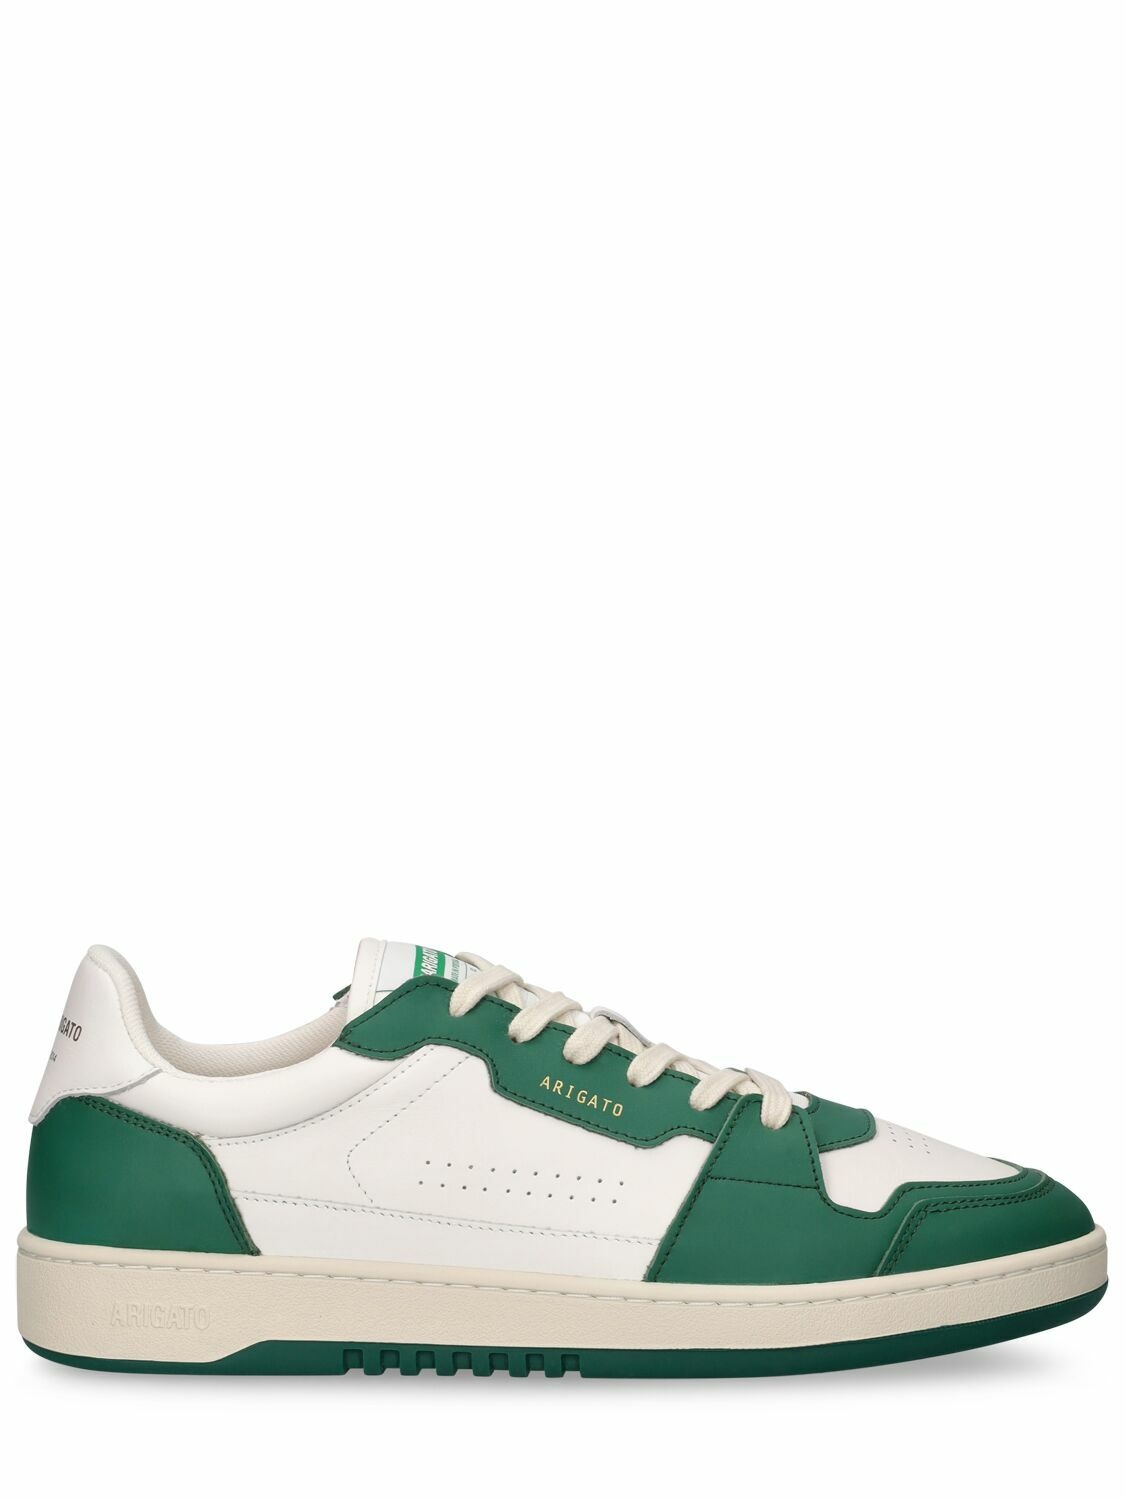 Photo: AXEL ARIGATO Dice Low Leather Sneakers